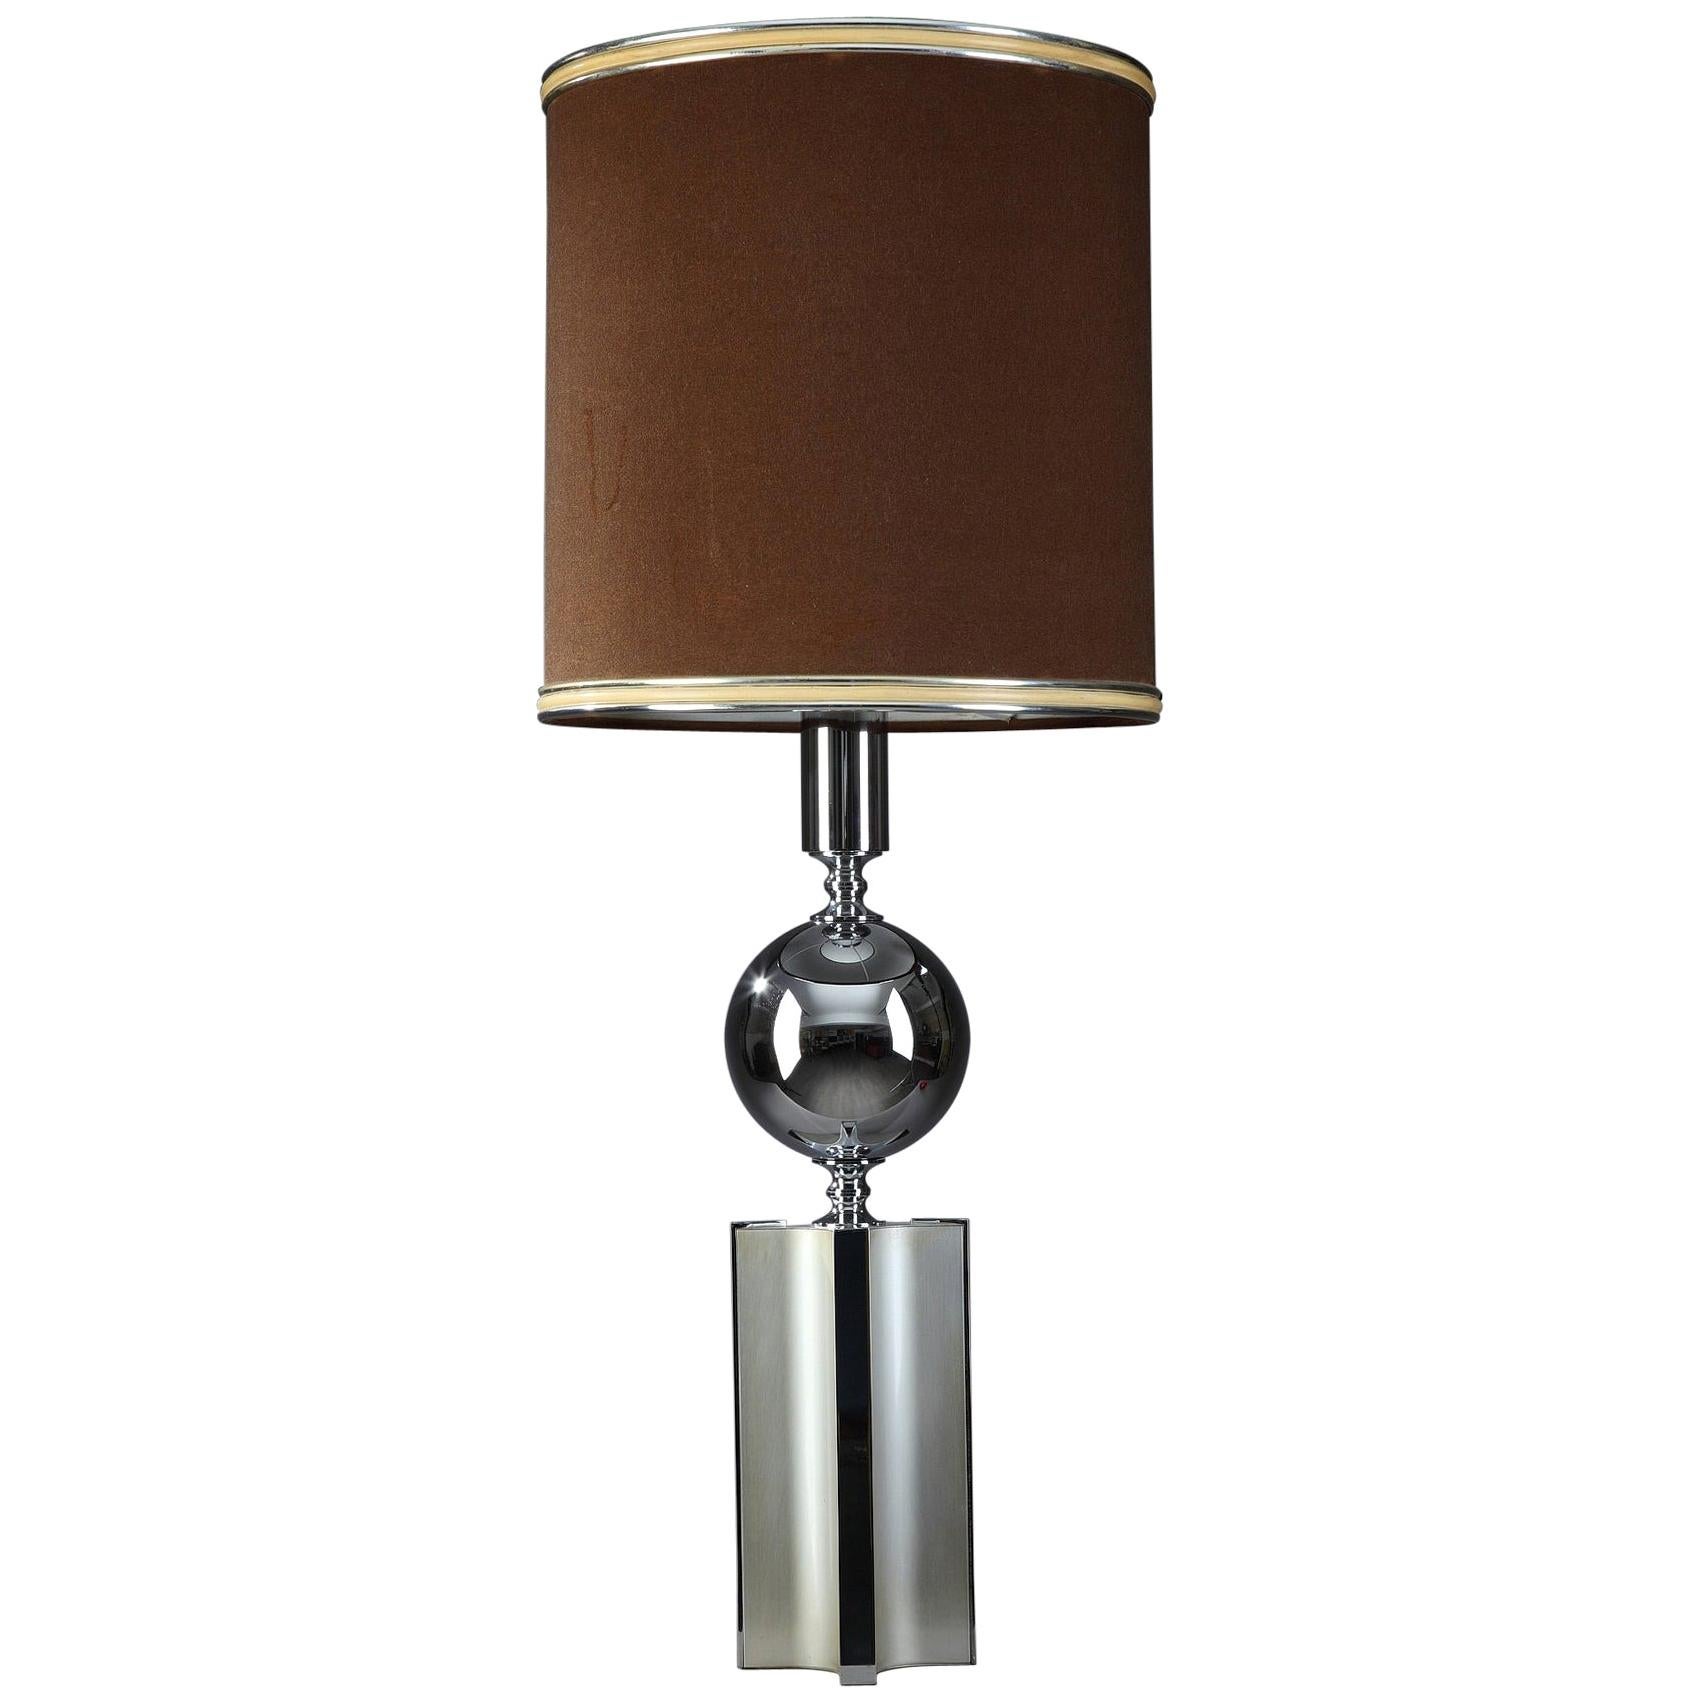 20th Century Chrome-Plated Metal Lamp in Charles House Style